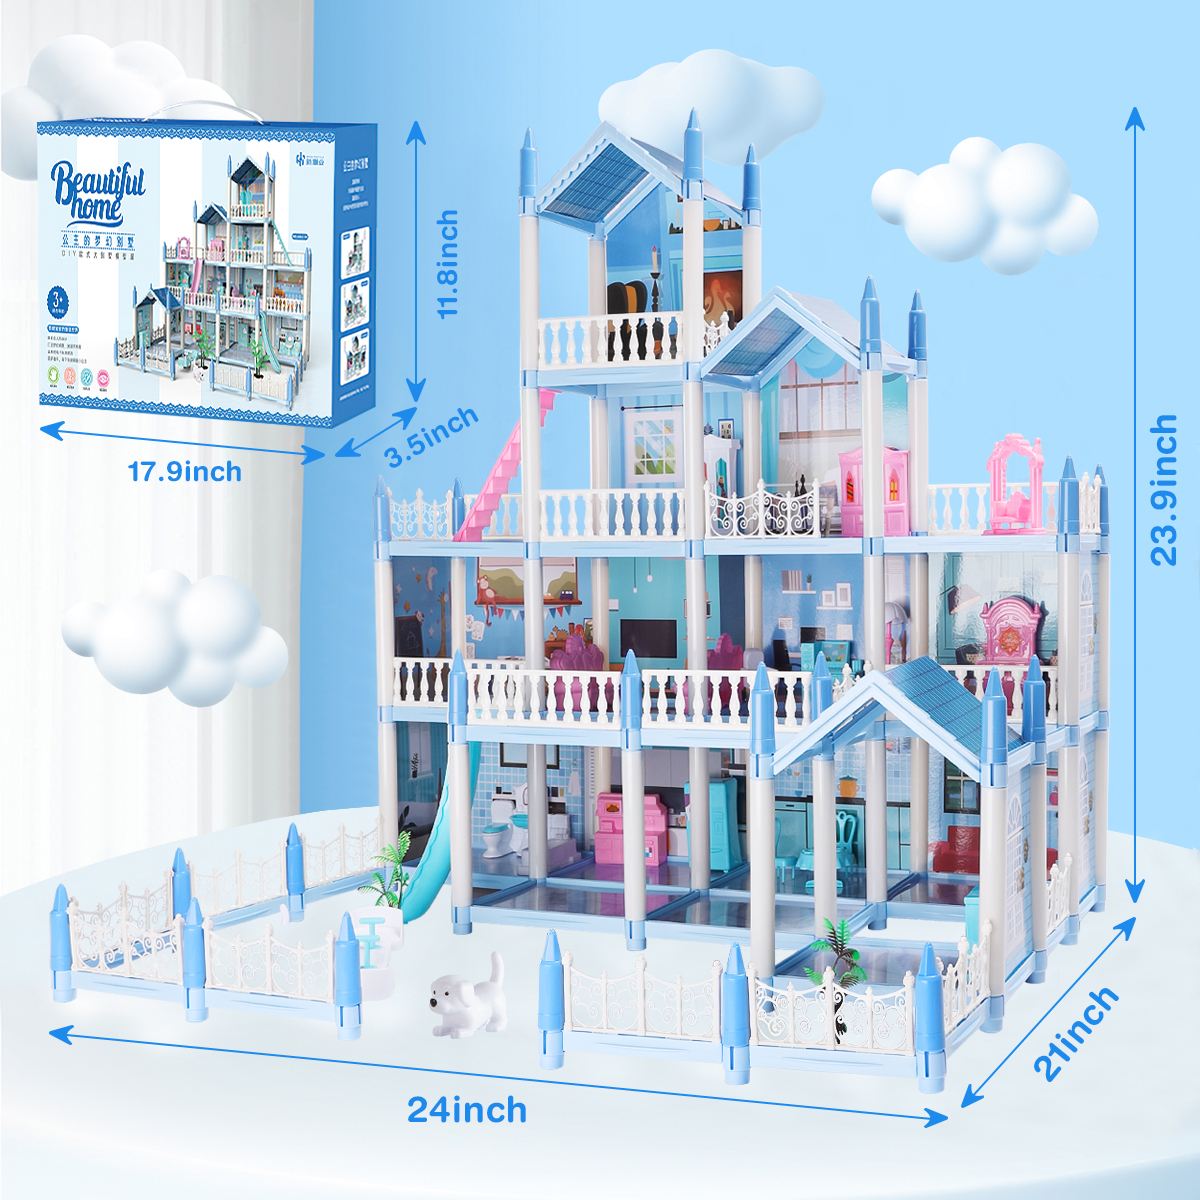 Doll House, Dream House Playset with 100+ Furniture & Accessories, 4 Stories 14 Rooms Building Toys with Movable Slides, Stairs, Pets, Cottage, DIY Creative Gift for 3 4 5 6+ Year Old Girls Toddlers - image 4 of 7